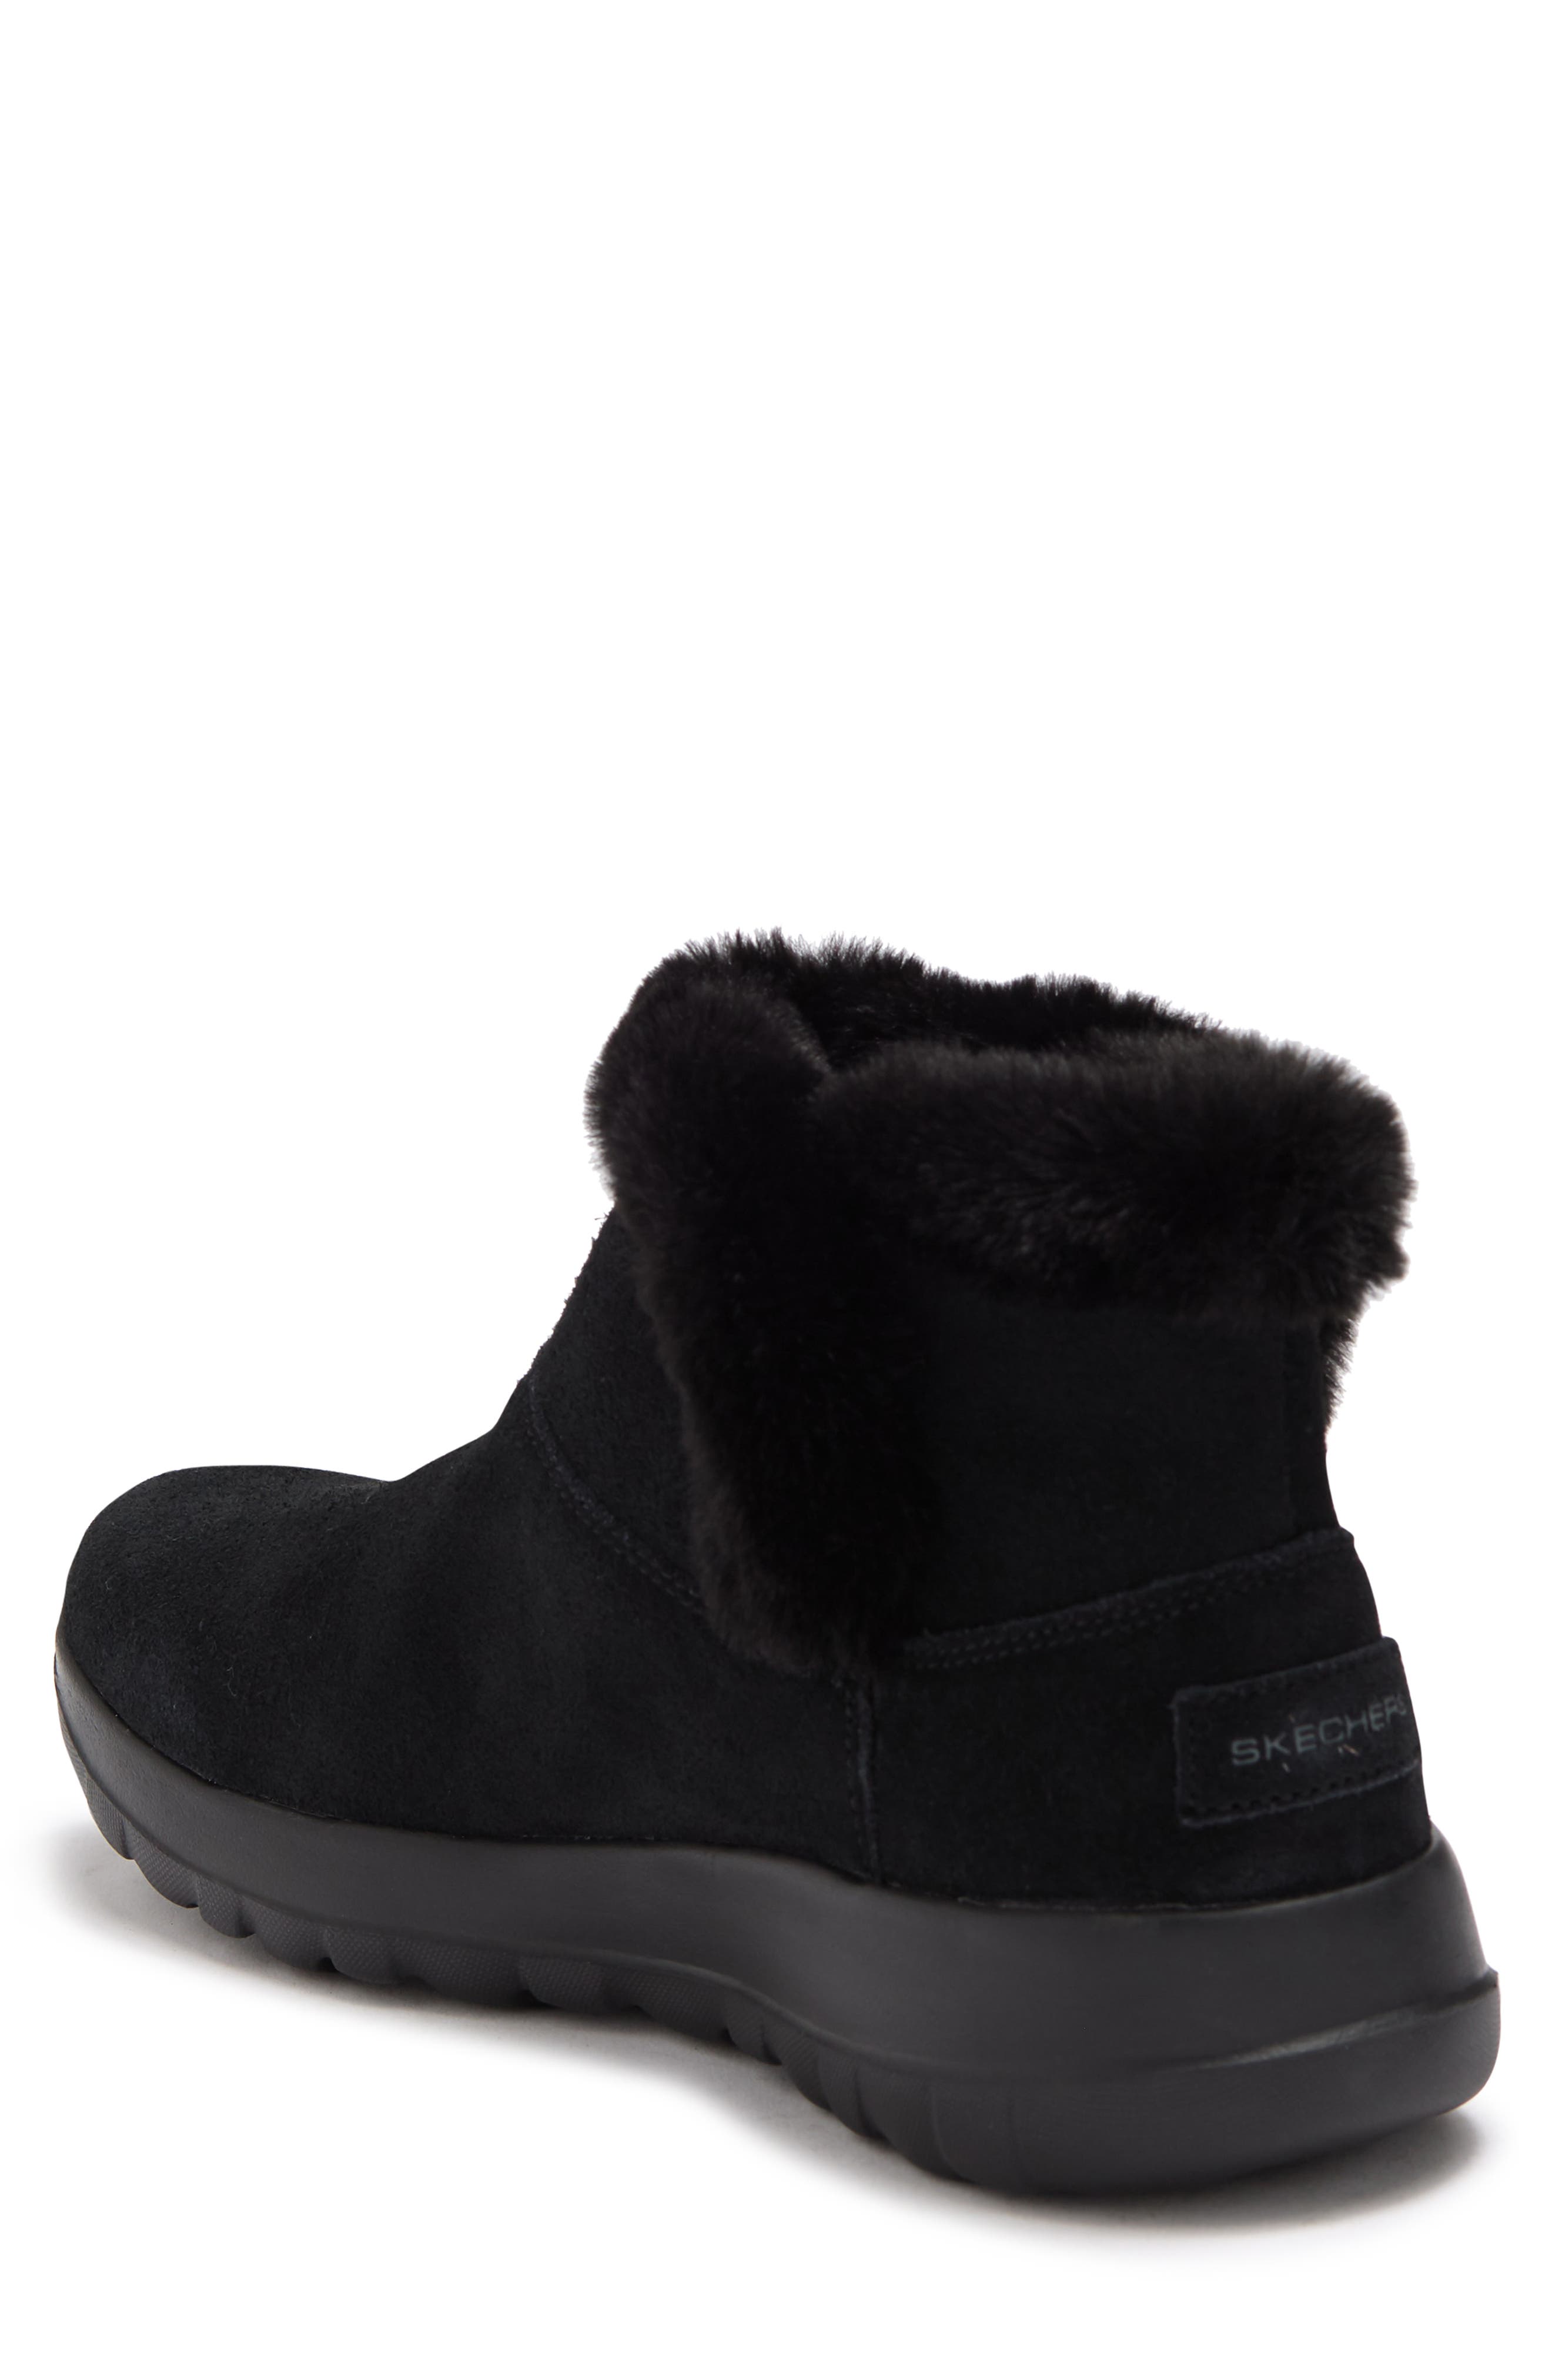 skechers fur lined boots